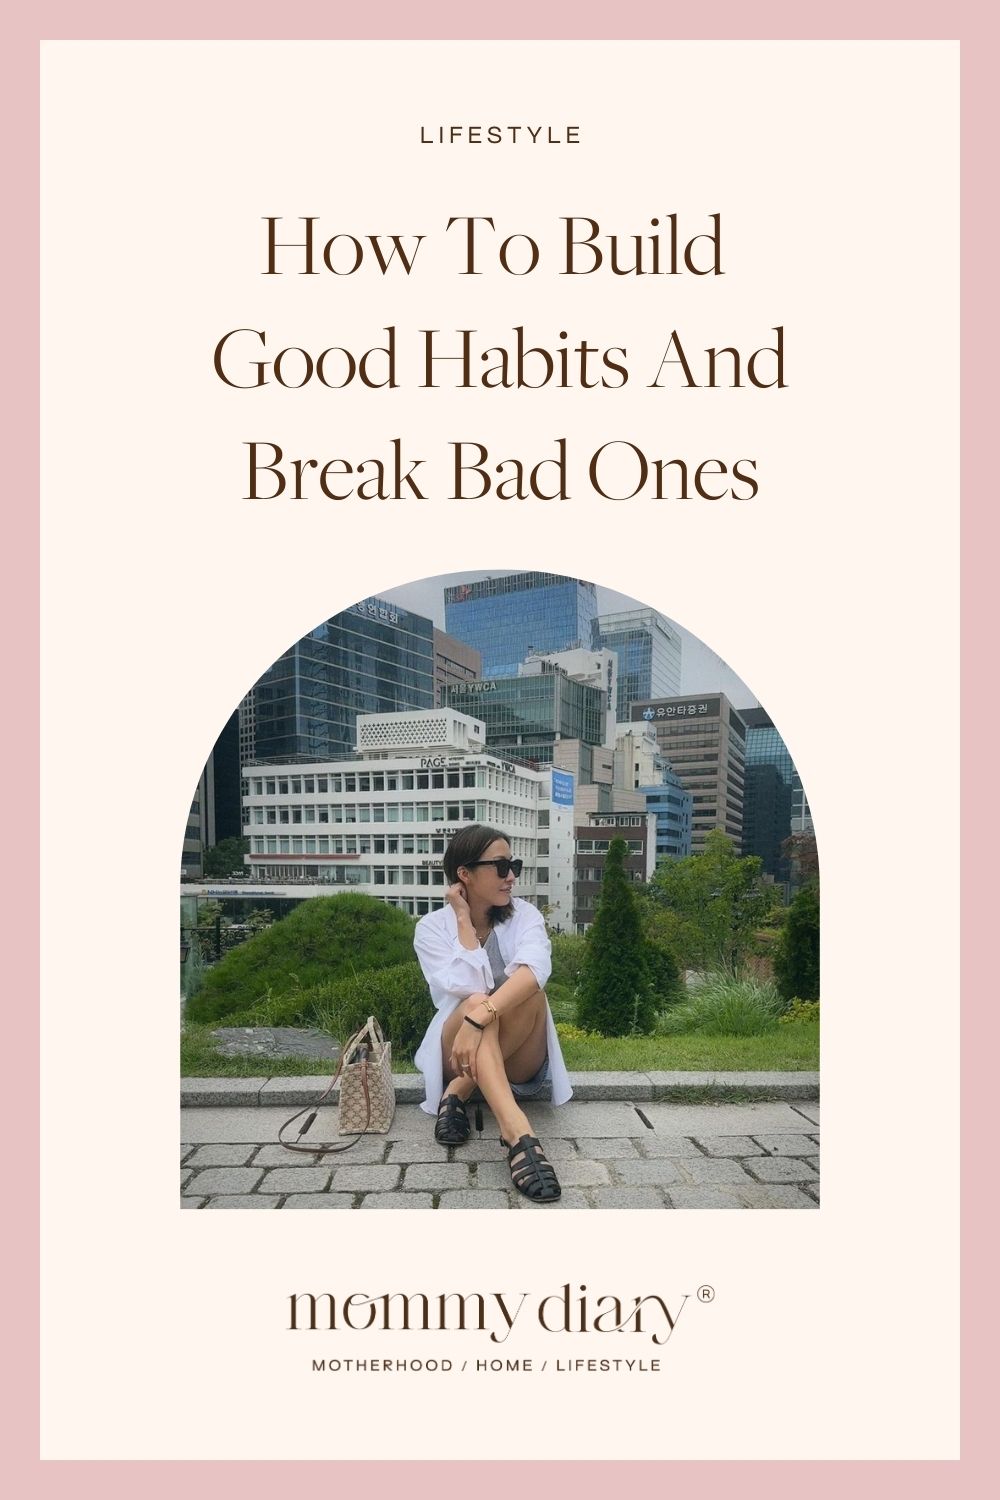 Habits Guide: How to Build Good Habits and Break Bad Ones